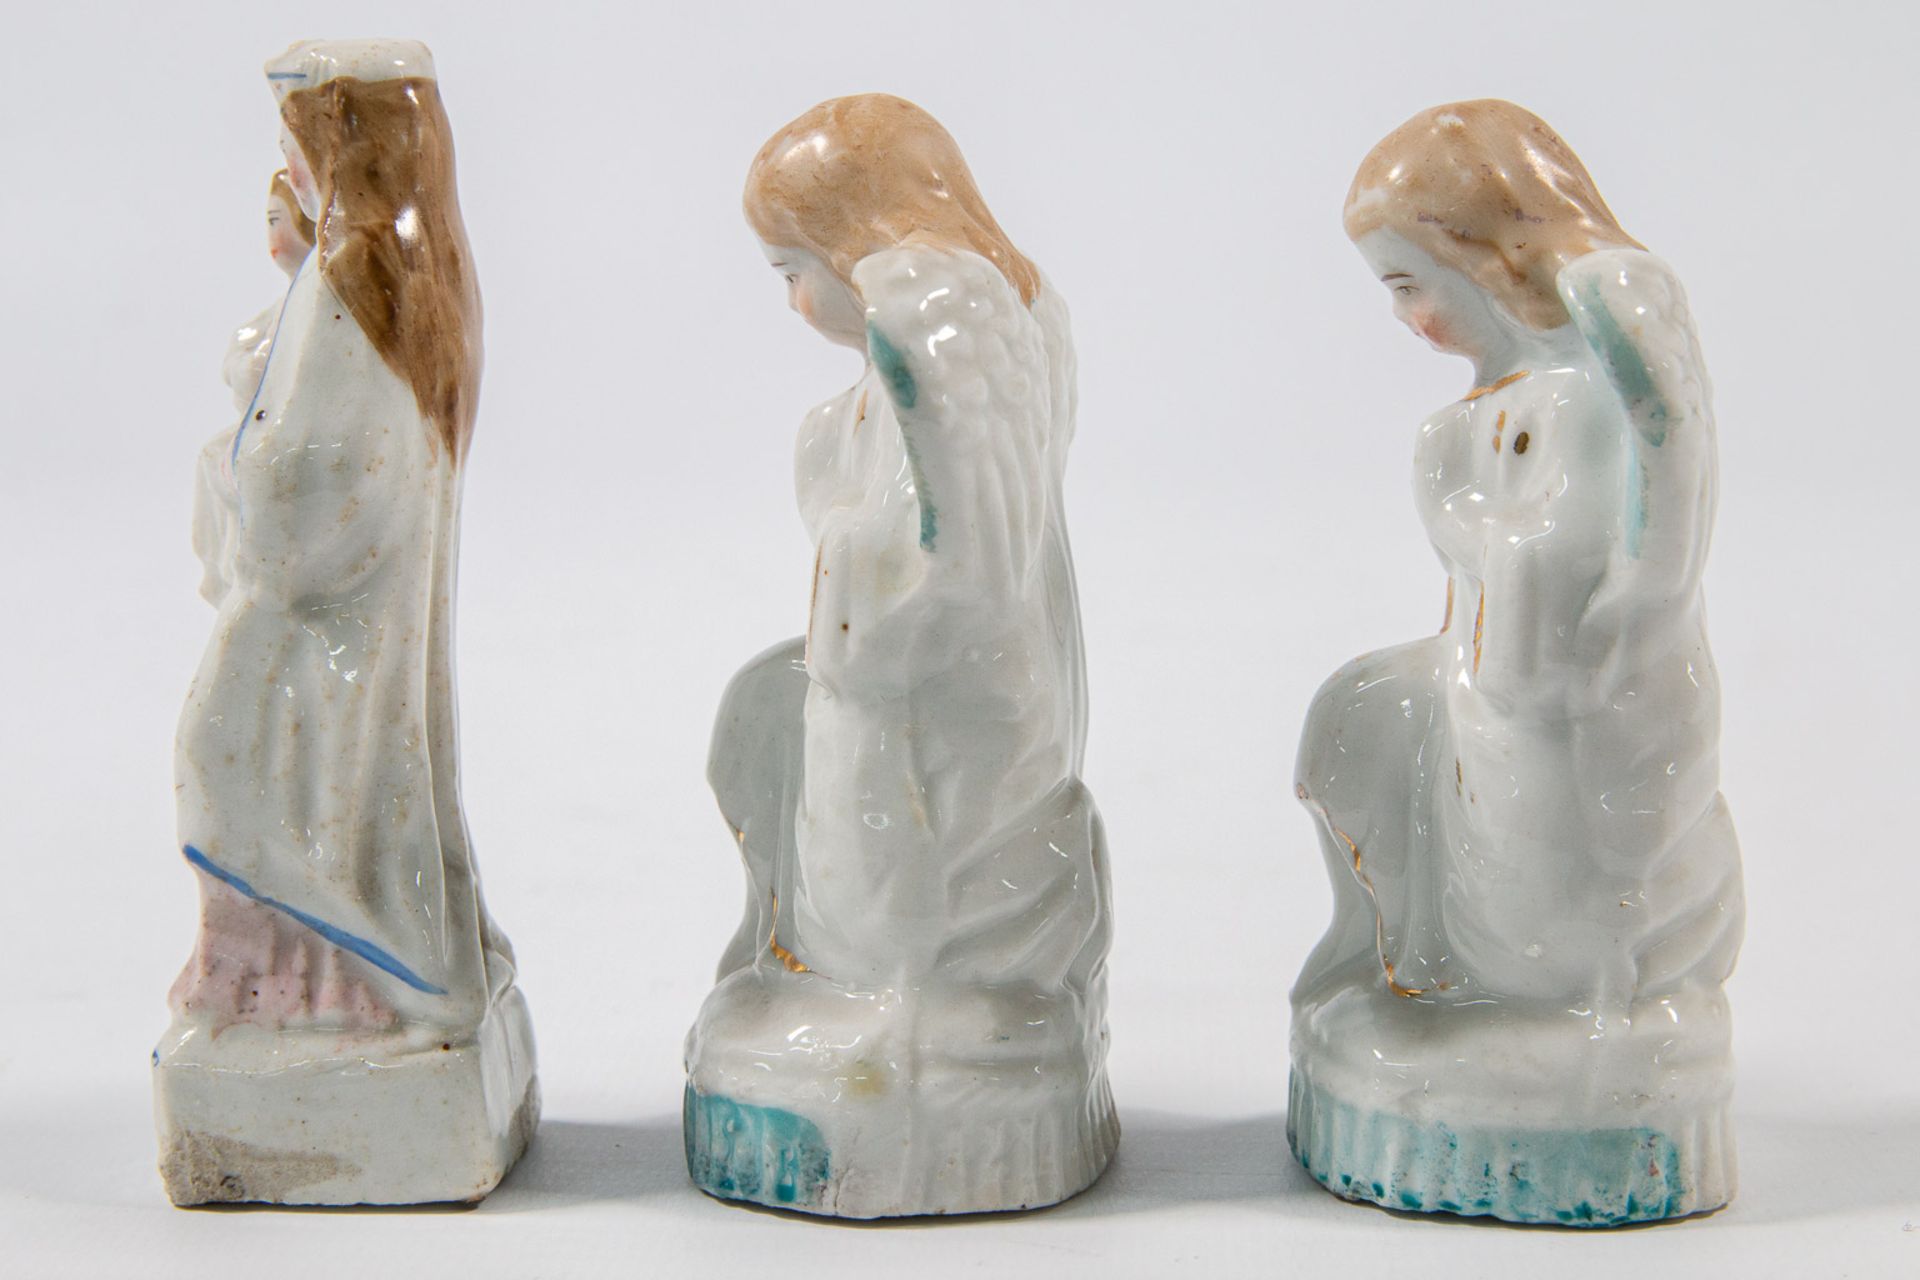 A collection of 11 bisque porcelain holy statues, Mary, Joseph, and Madonna. - Image 35 of 49